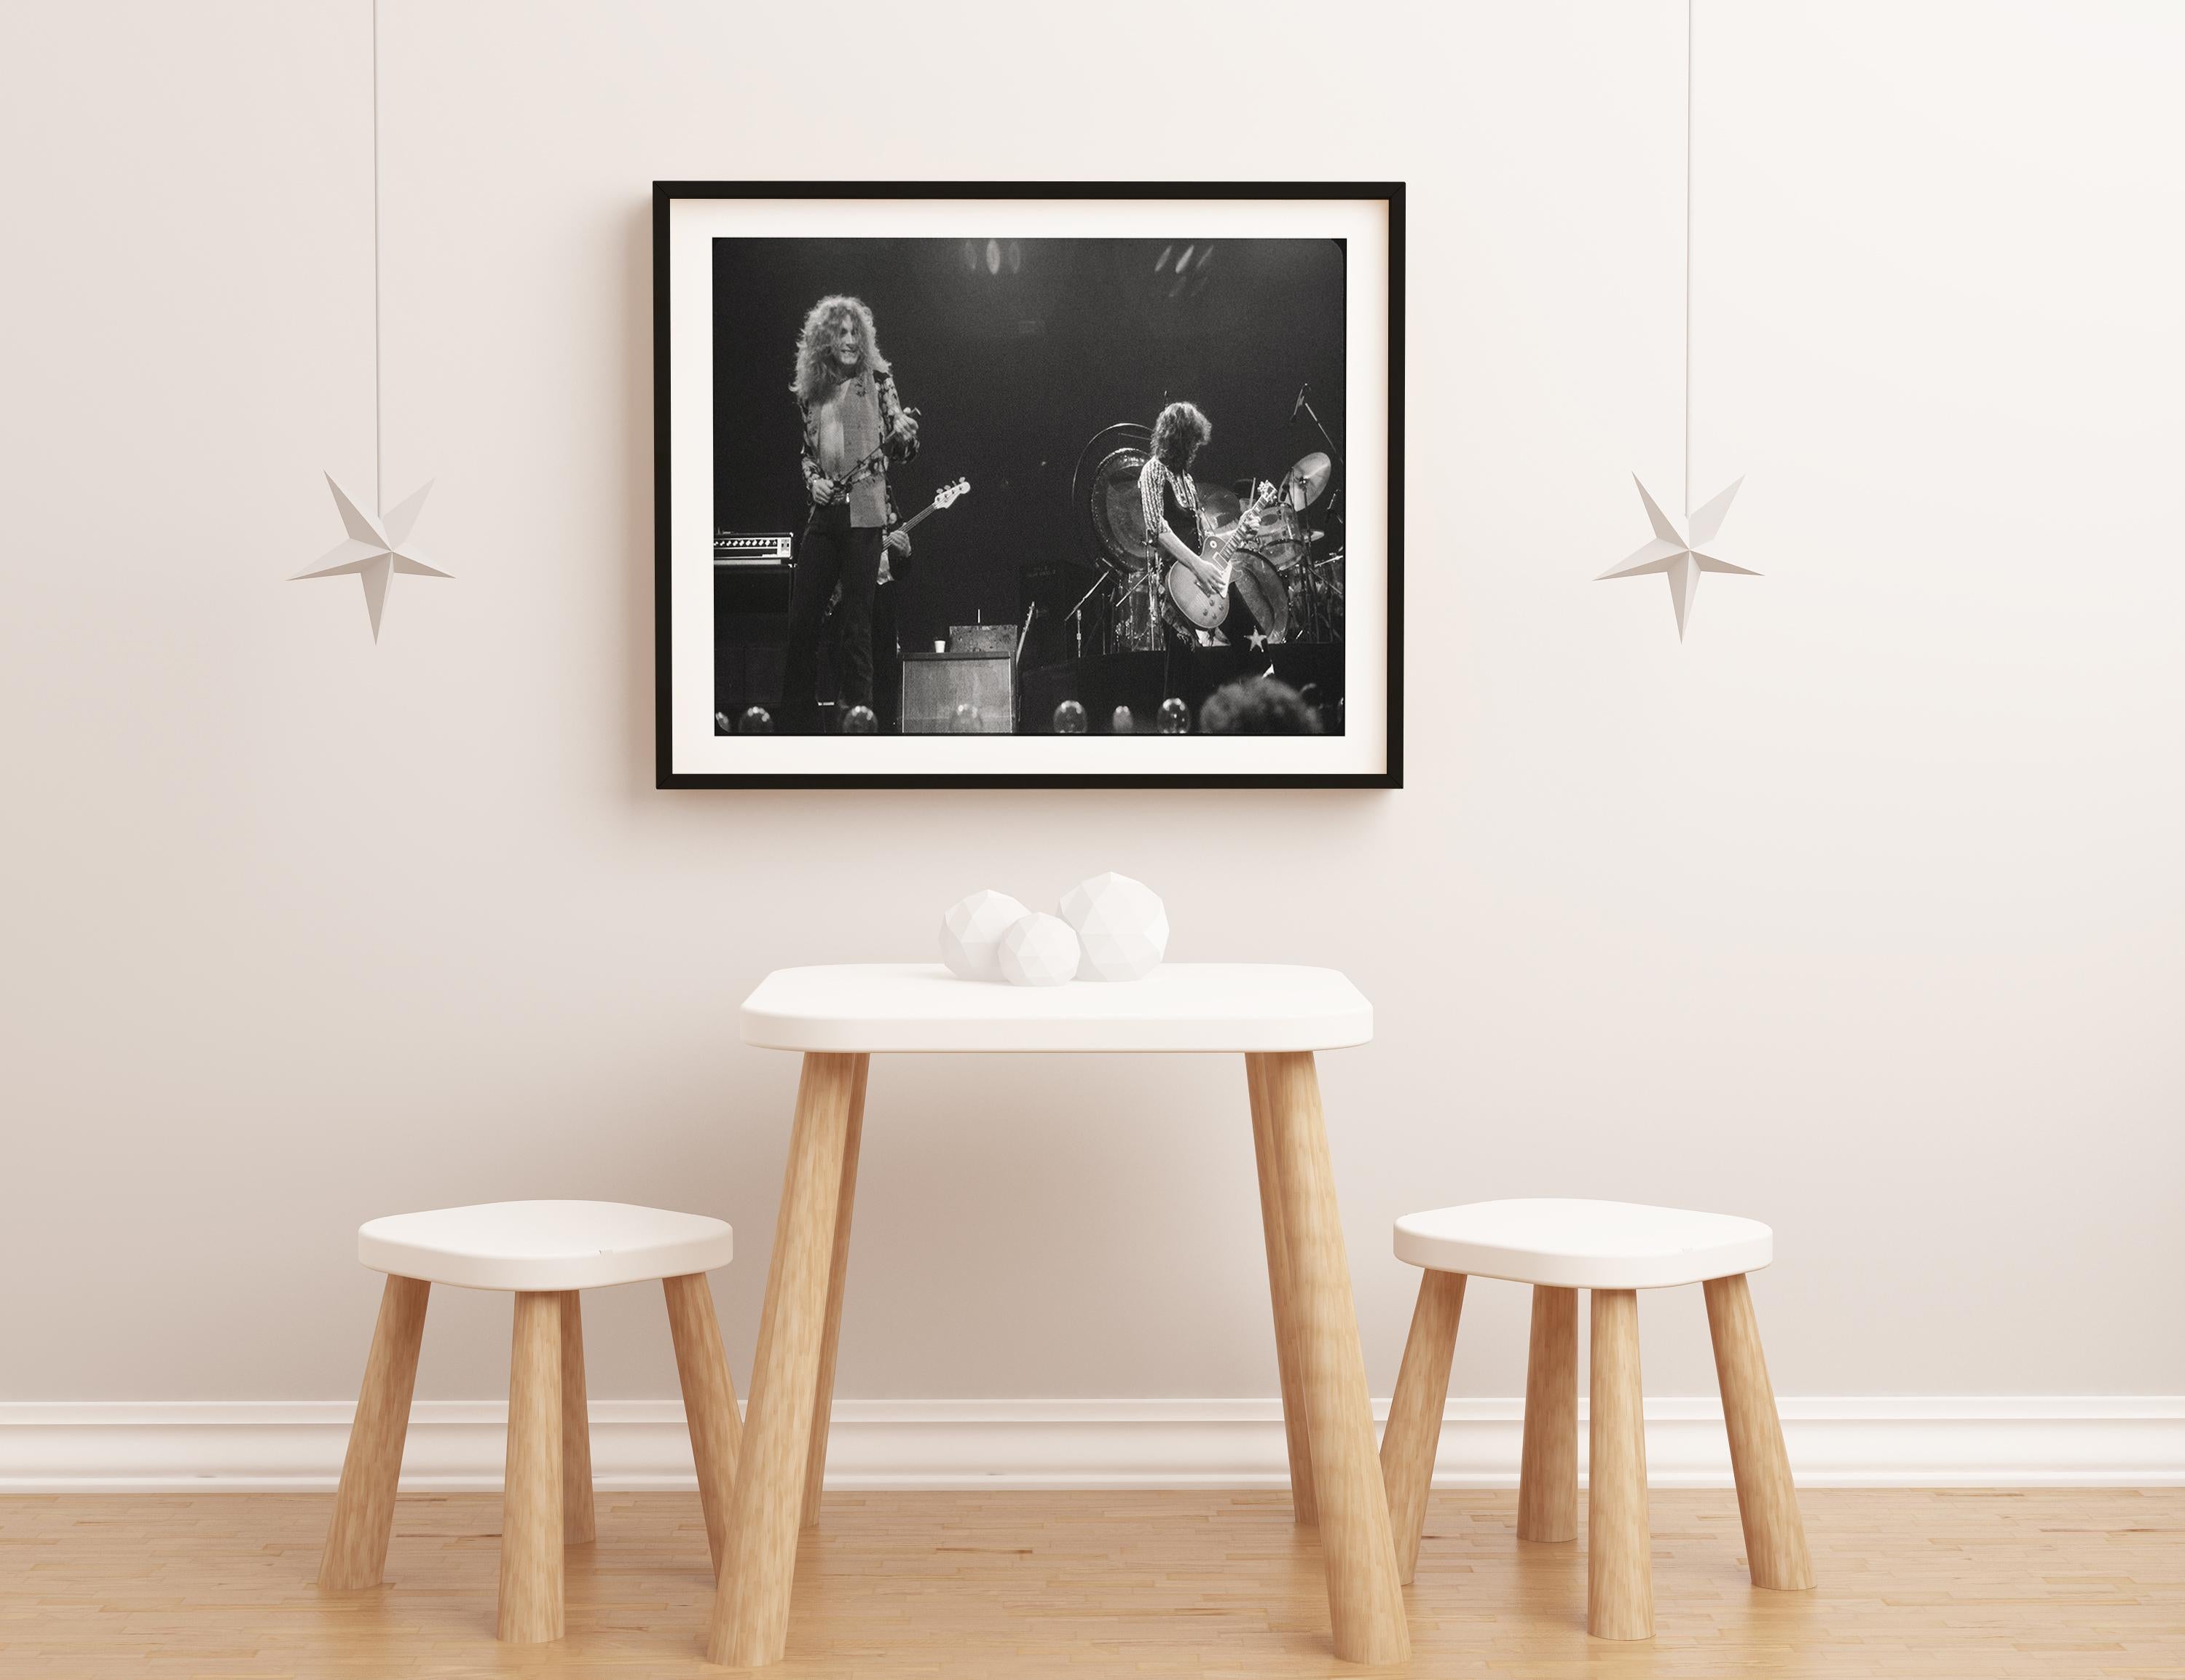 Robert Plant and Jimmy Page of Led Zeppelin Performing Fine Art Print - Black Portrait Photograph by David Plastik